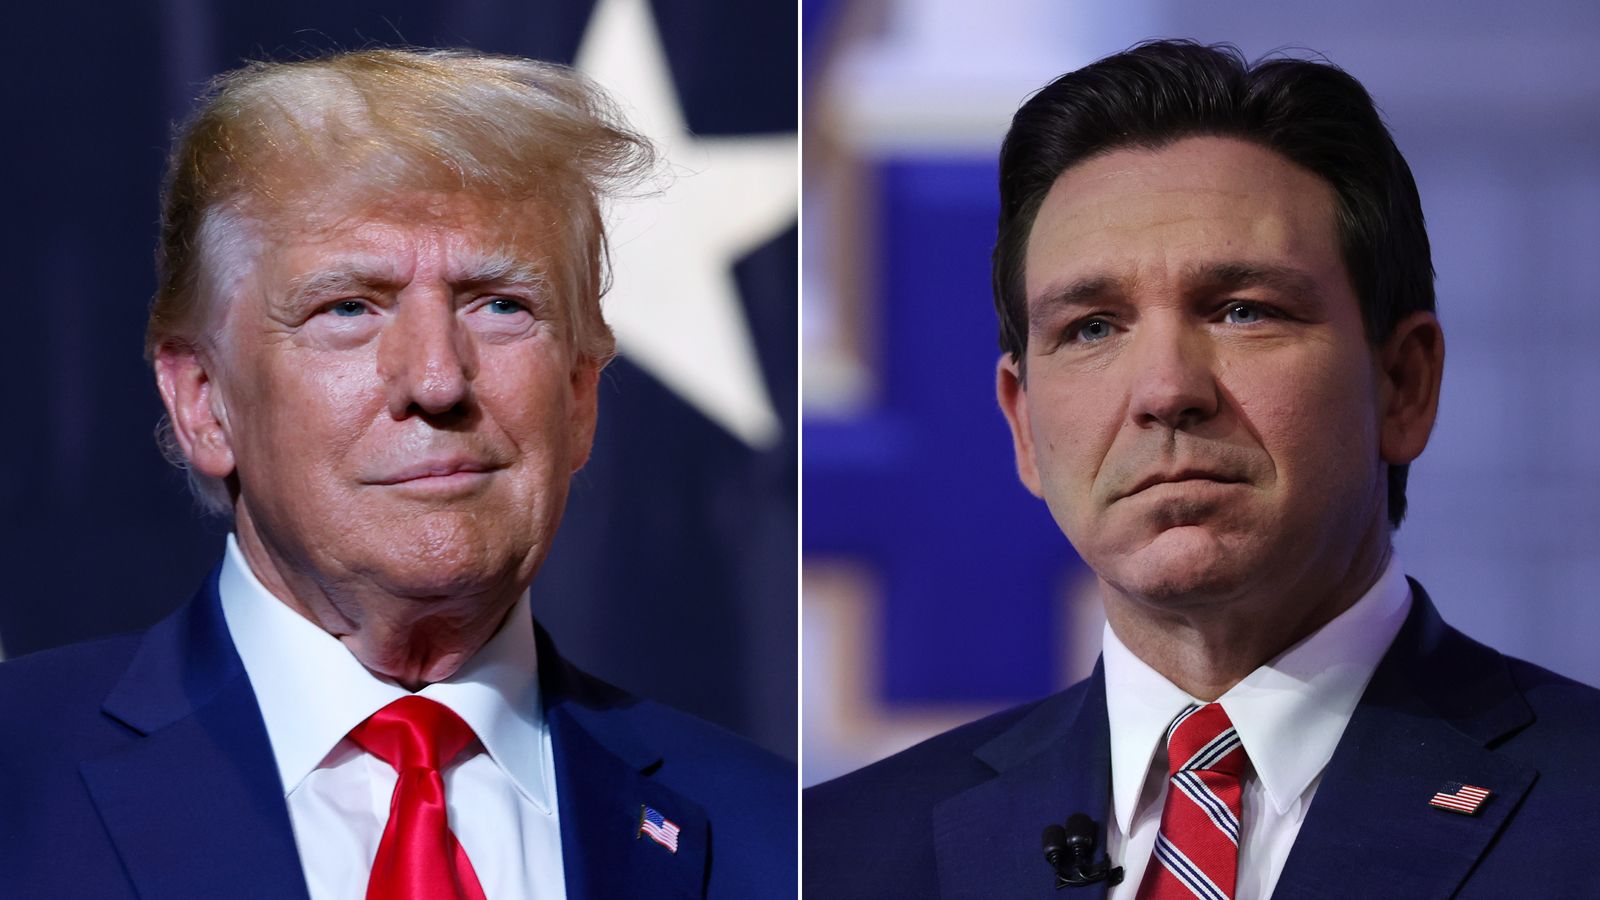 At Their Miami Meeting, Trump and DeSantis Formed an Alliance; What Does This Mean for GOP Politics?